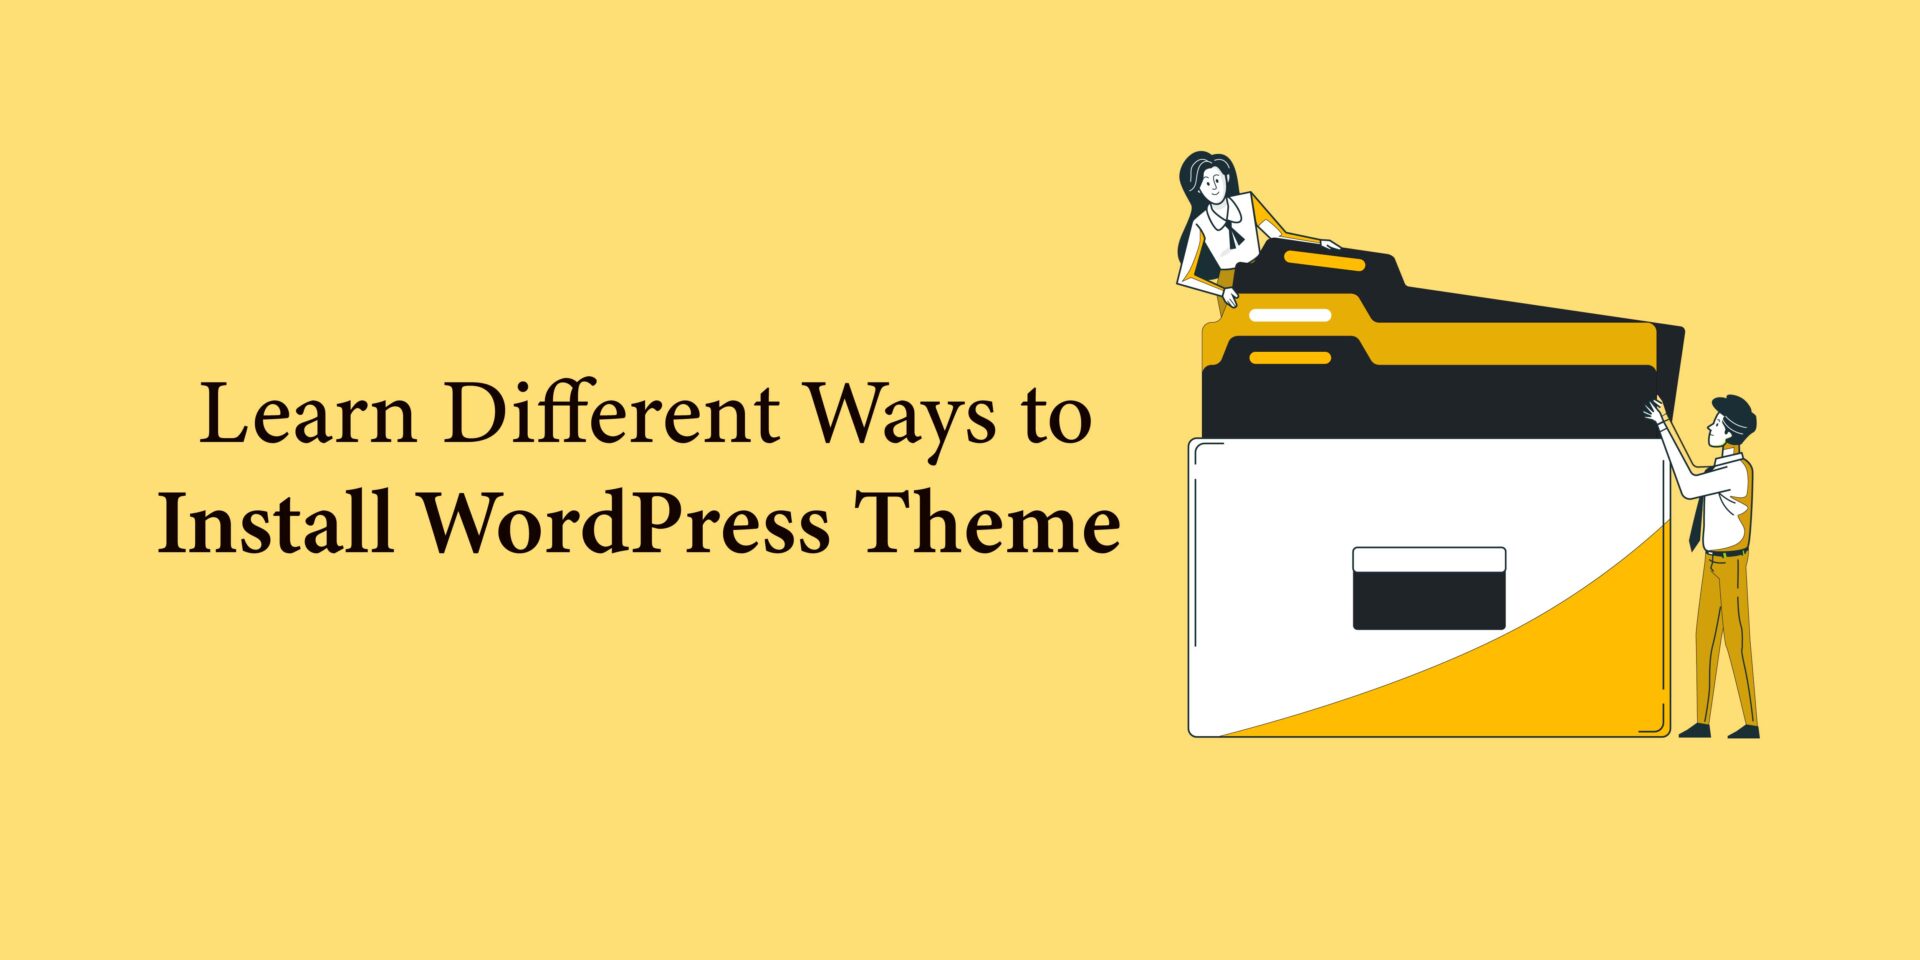 Learn Different Ways to Install WordPress themes